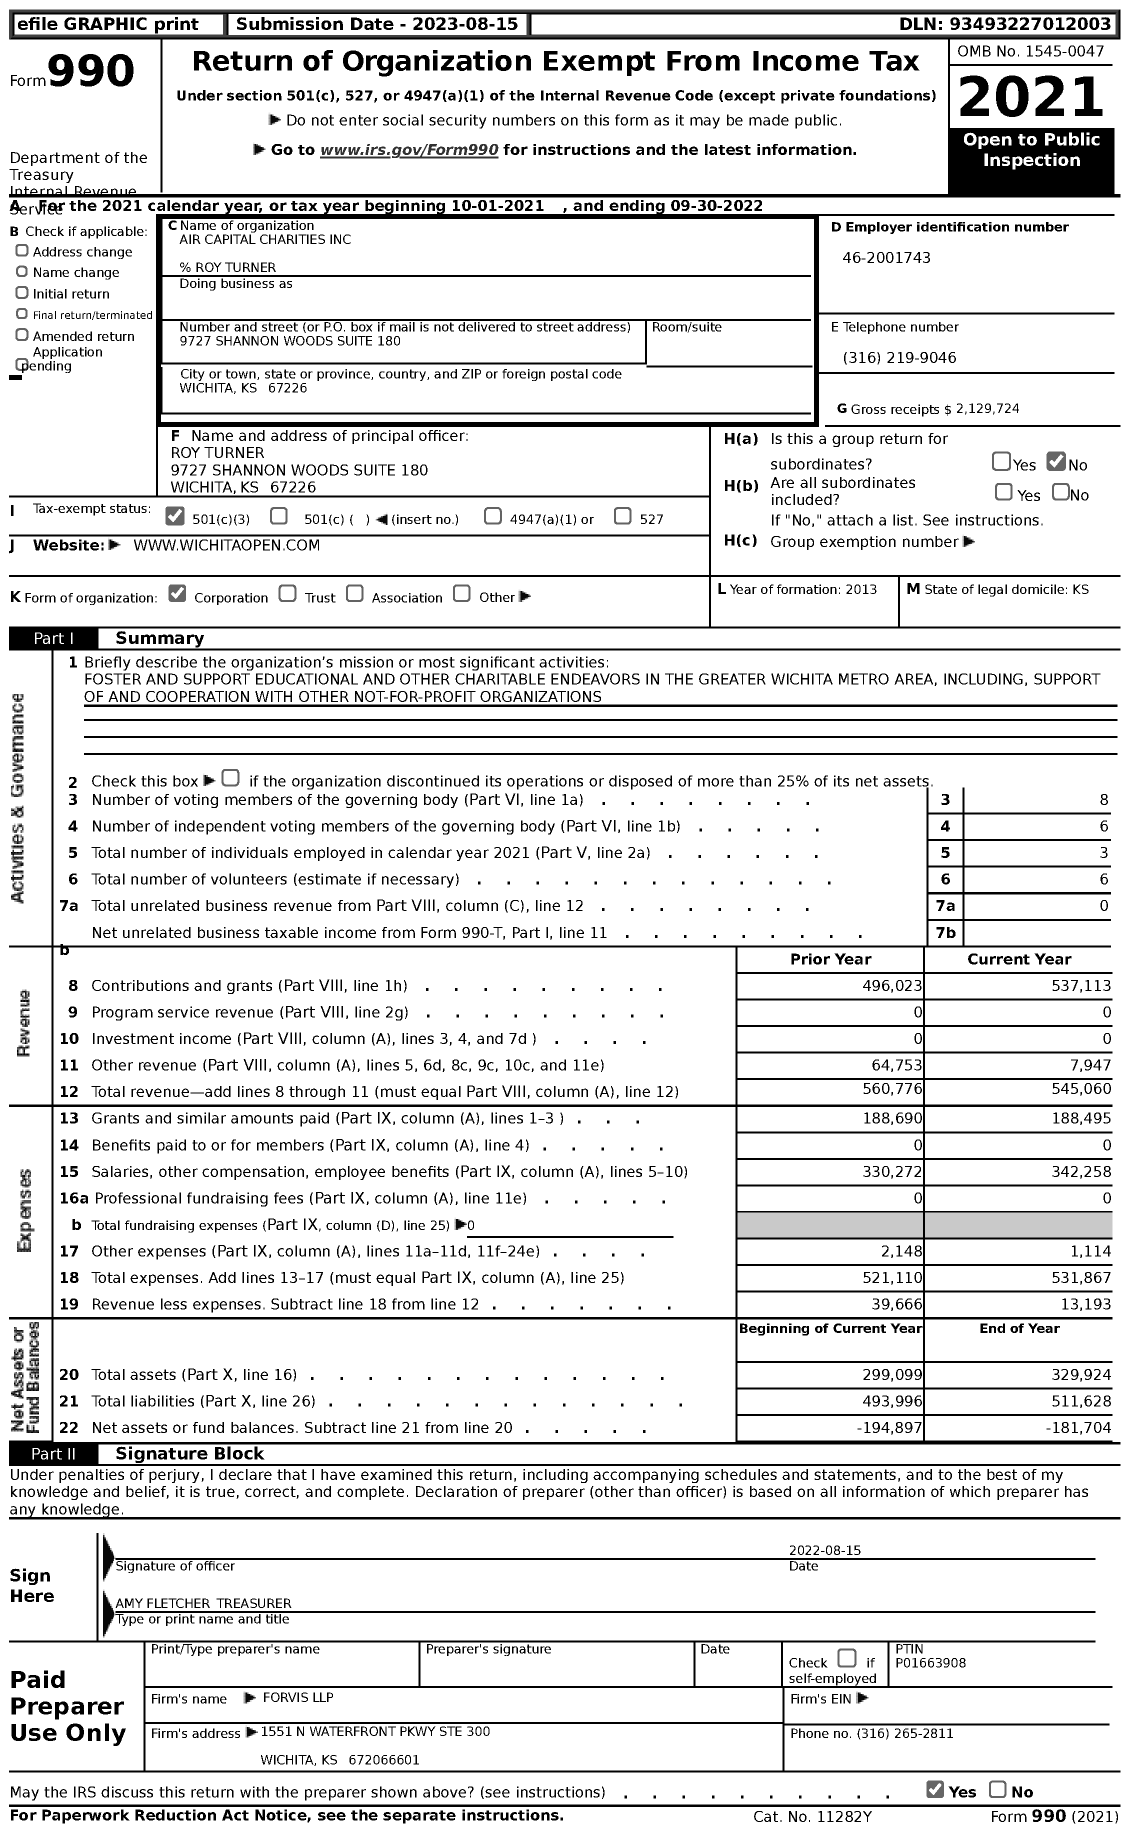 Image of first page of 2021 Form 990 for Air Capital Charities